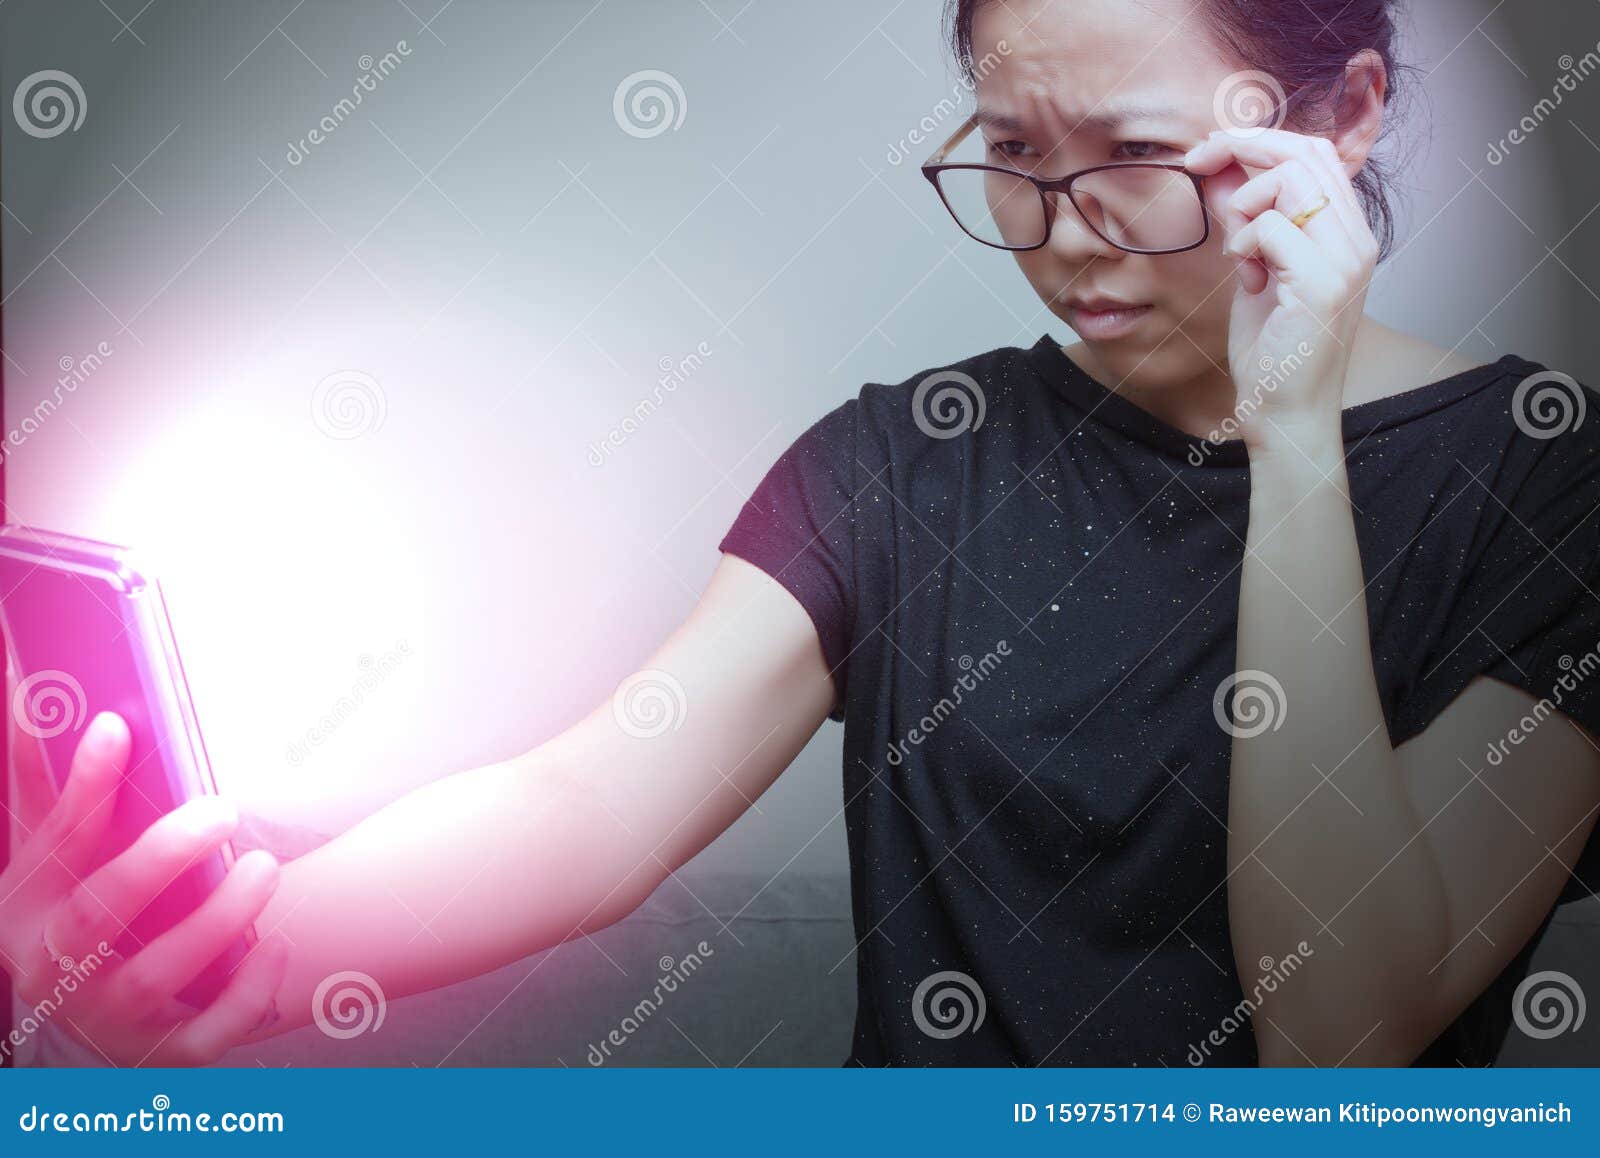 asian female trying to read something in her mobile phone with red spot on her hand. poor sight, farsightedness, myopia